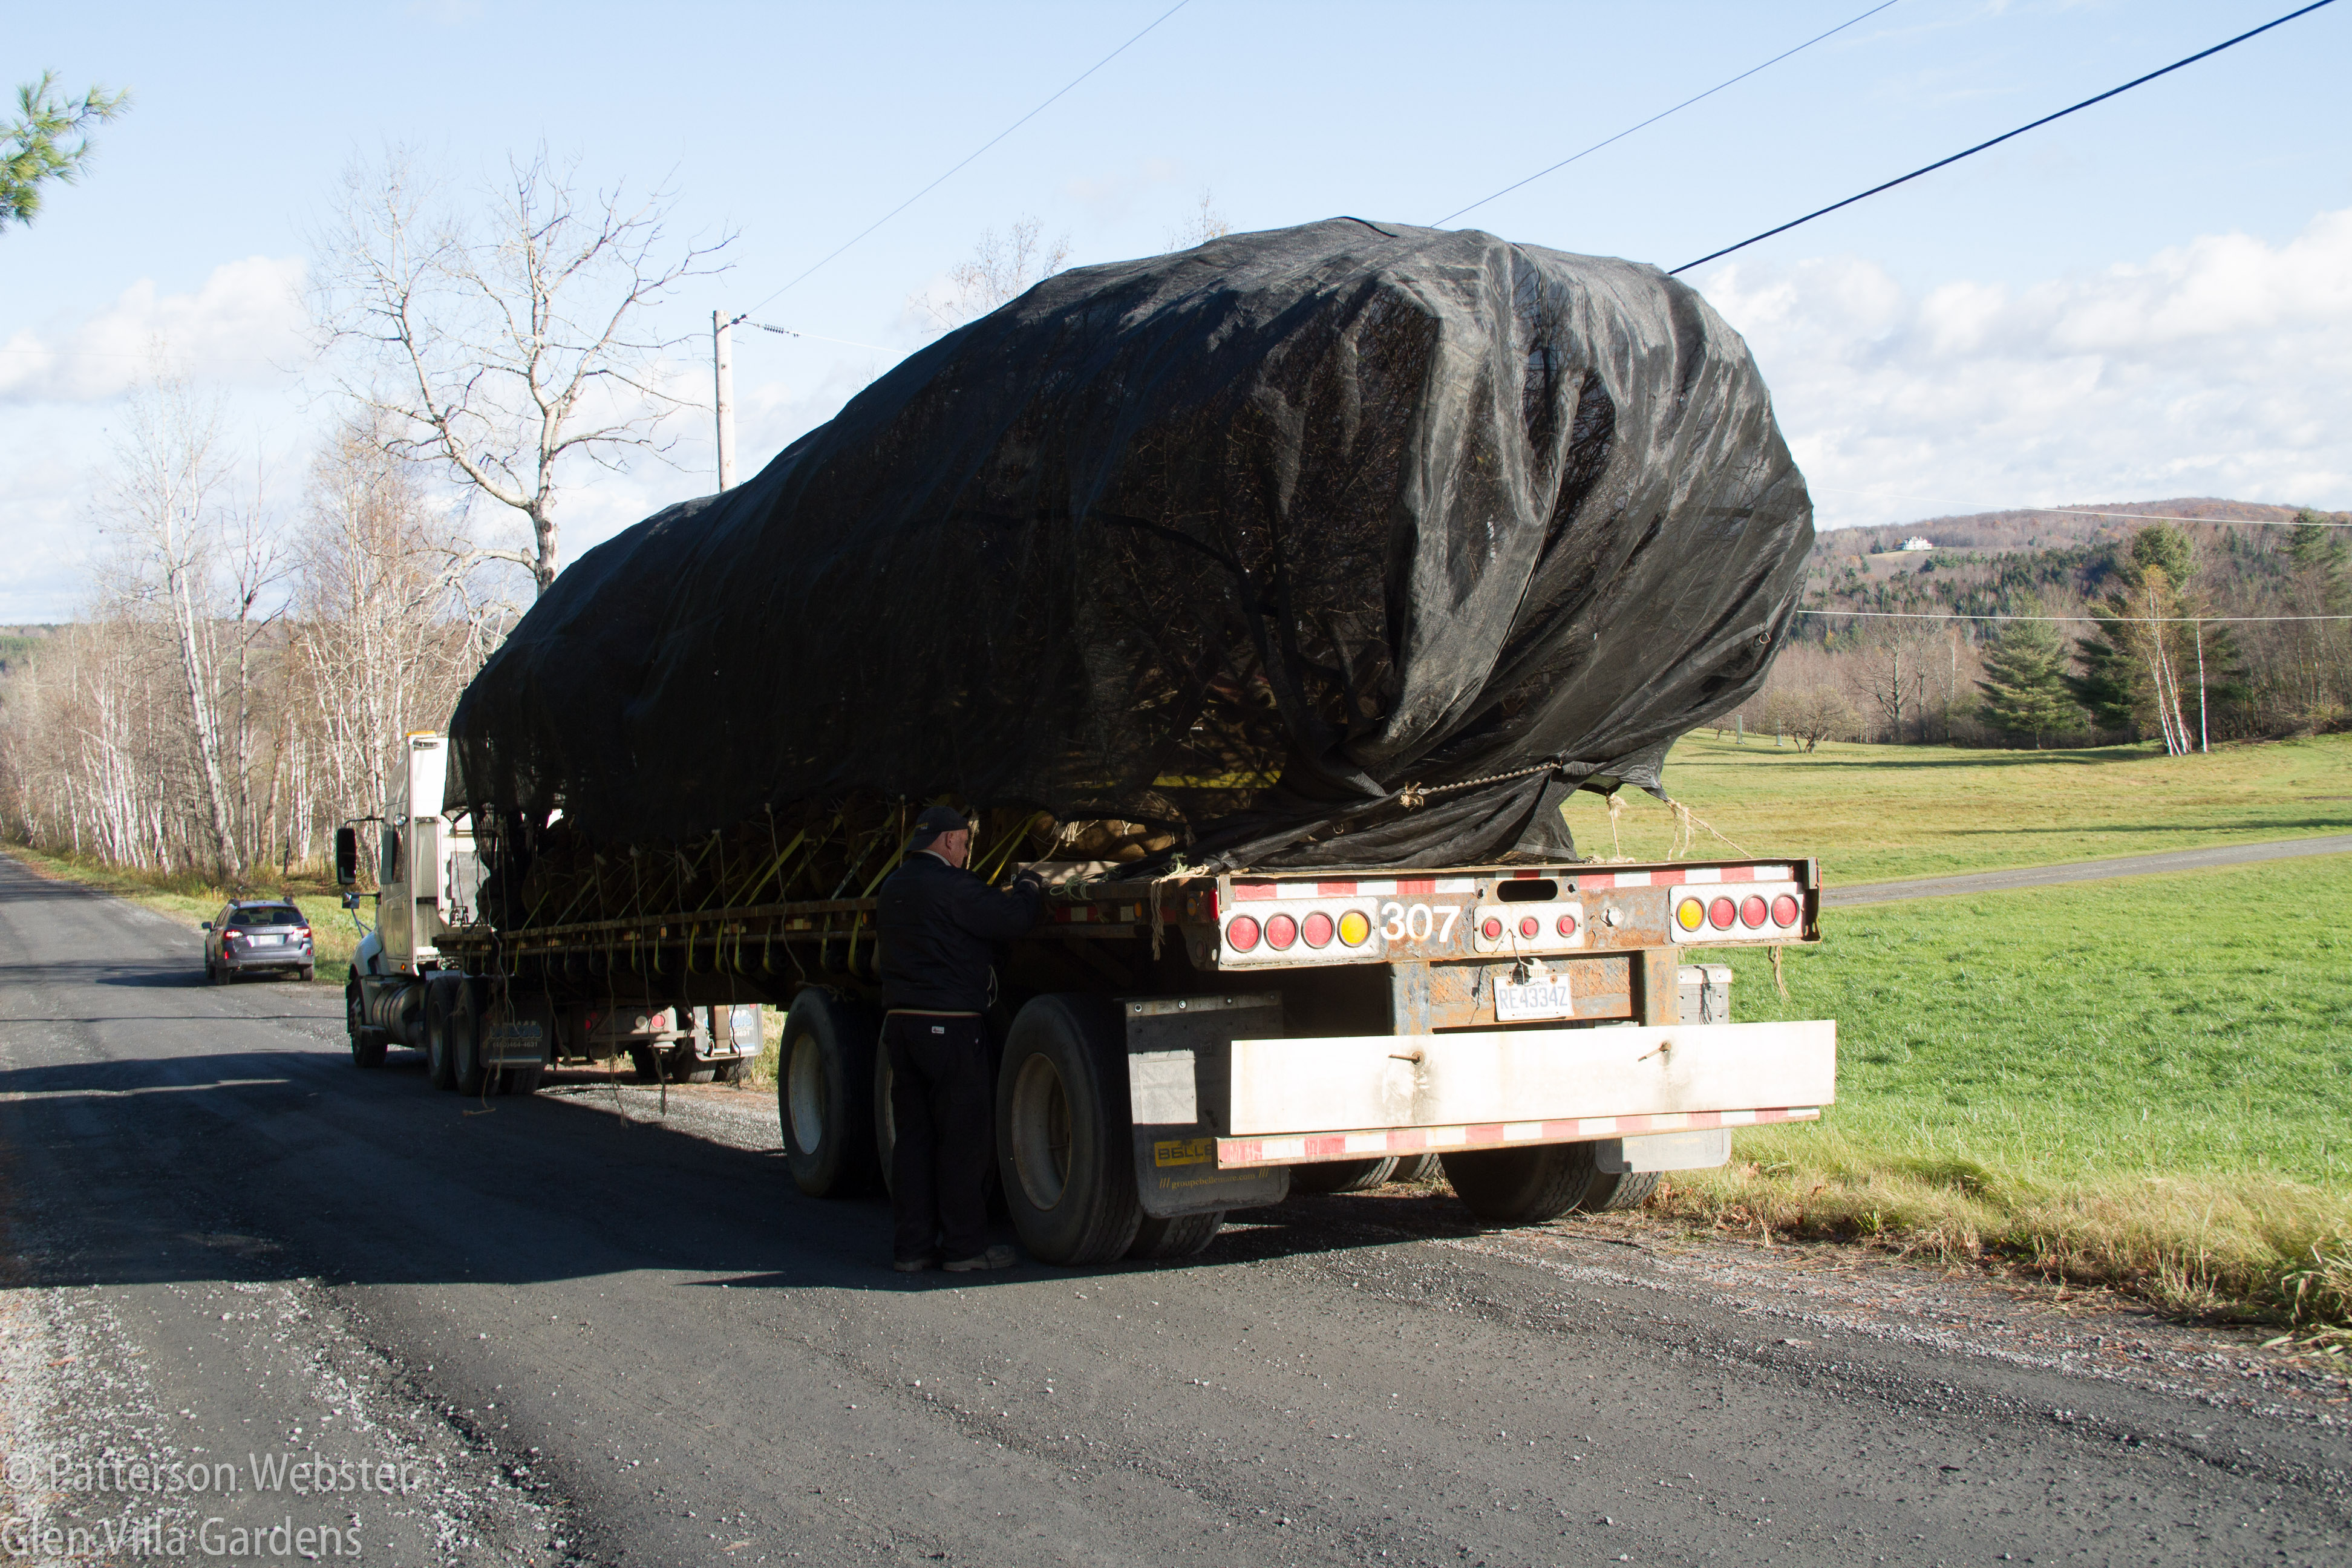 The covering protects the trees from wind damage. Does anyone else think it looks like a very large hair net?